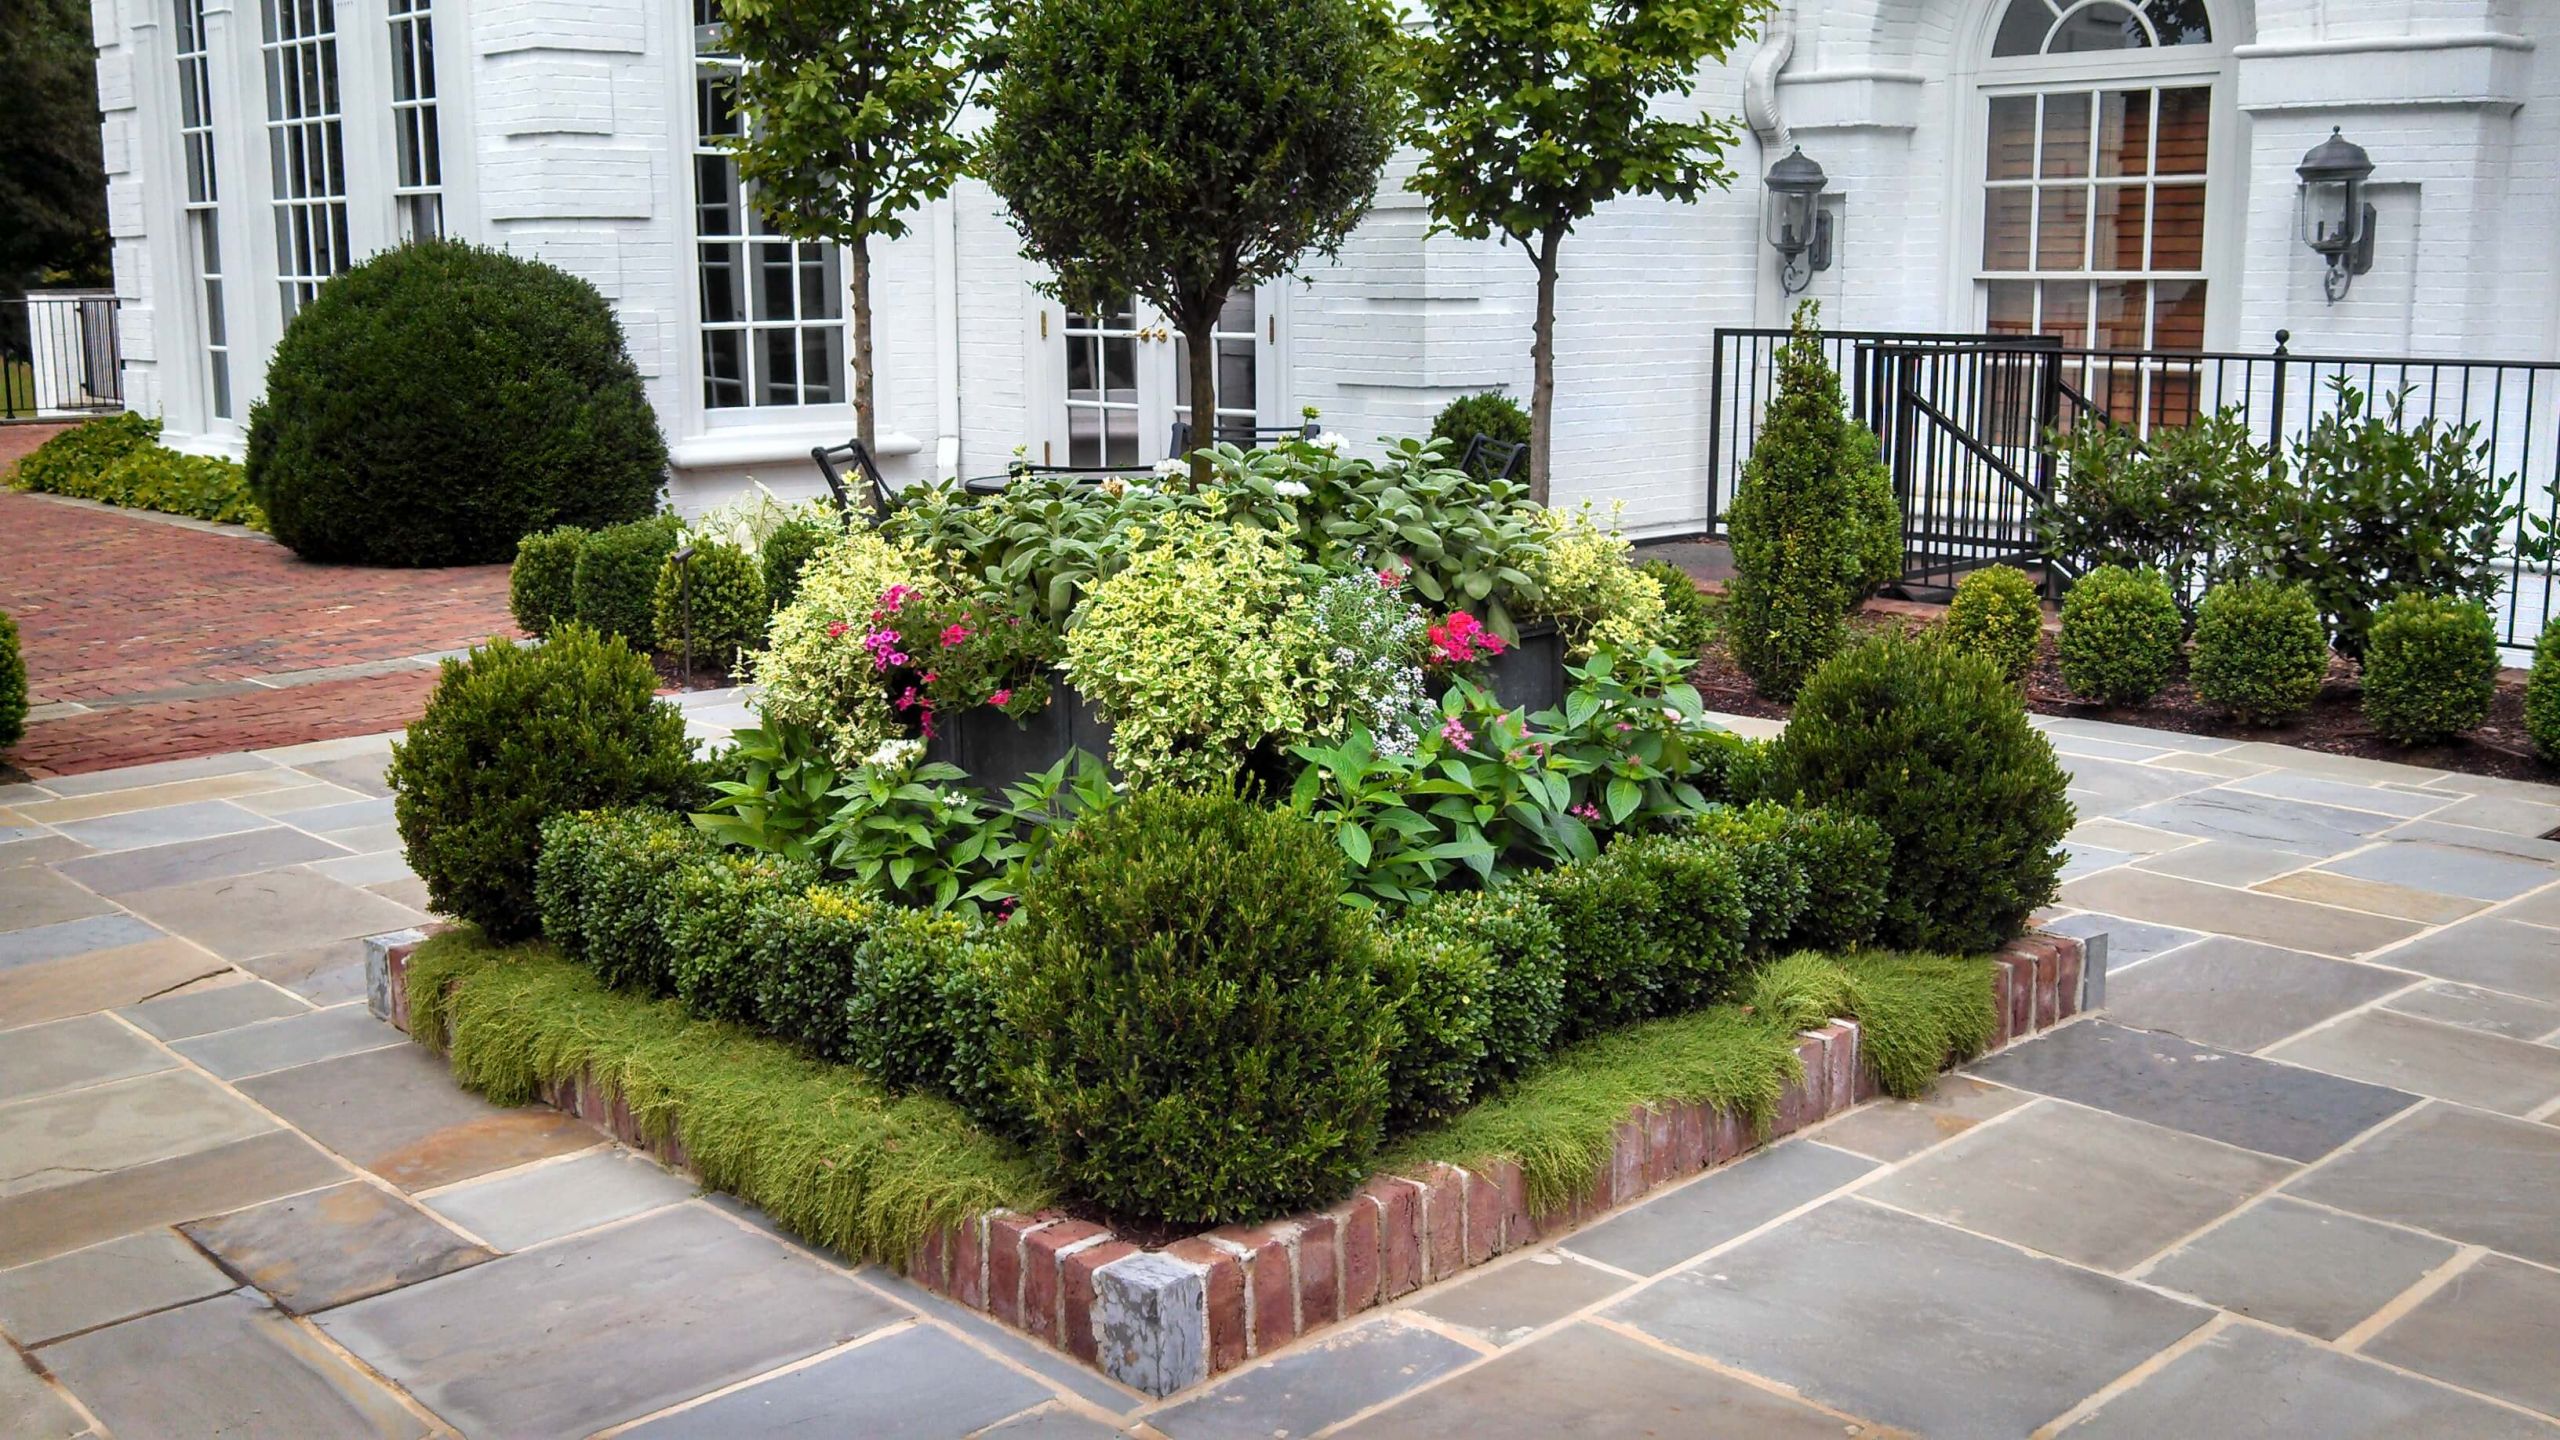 Landscape Ideas For Front Yard
 50 Best Front Yard Landscaping Ideas and Garden Designs